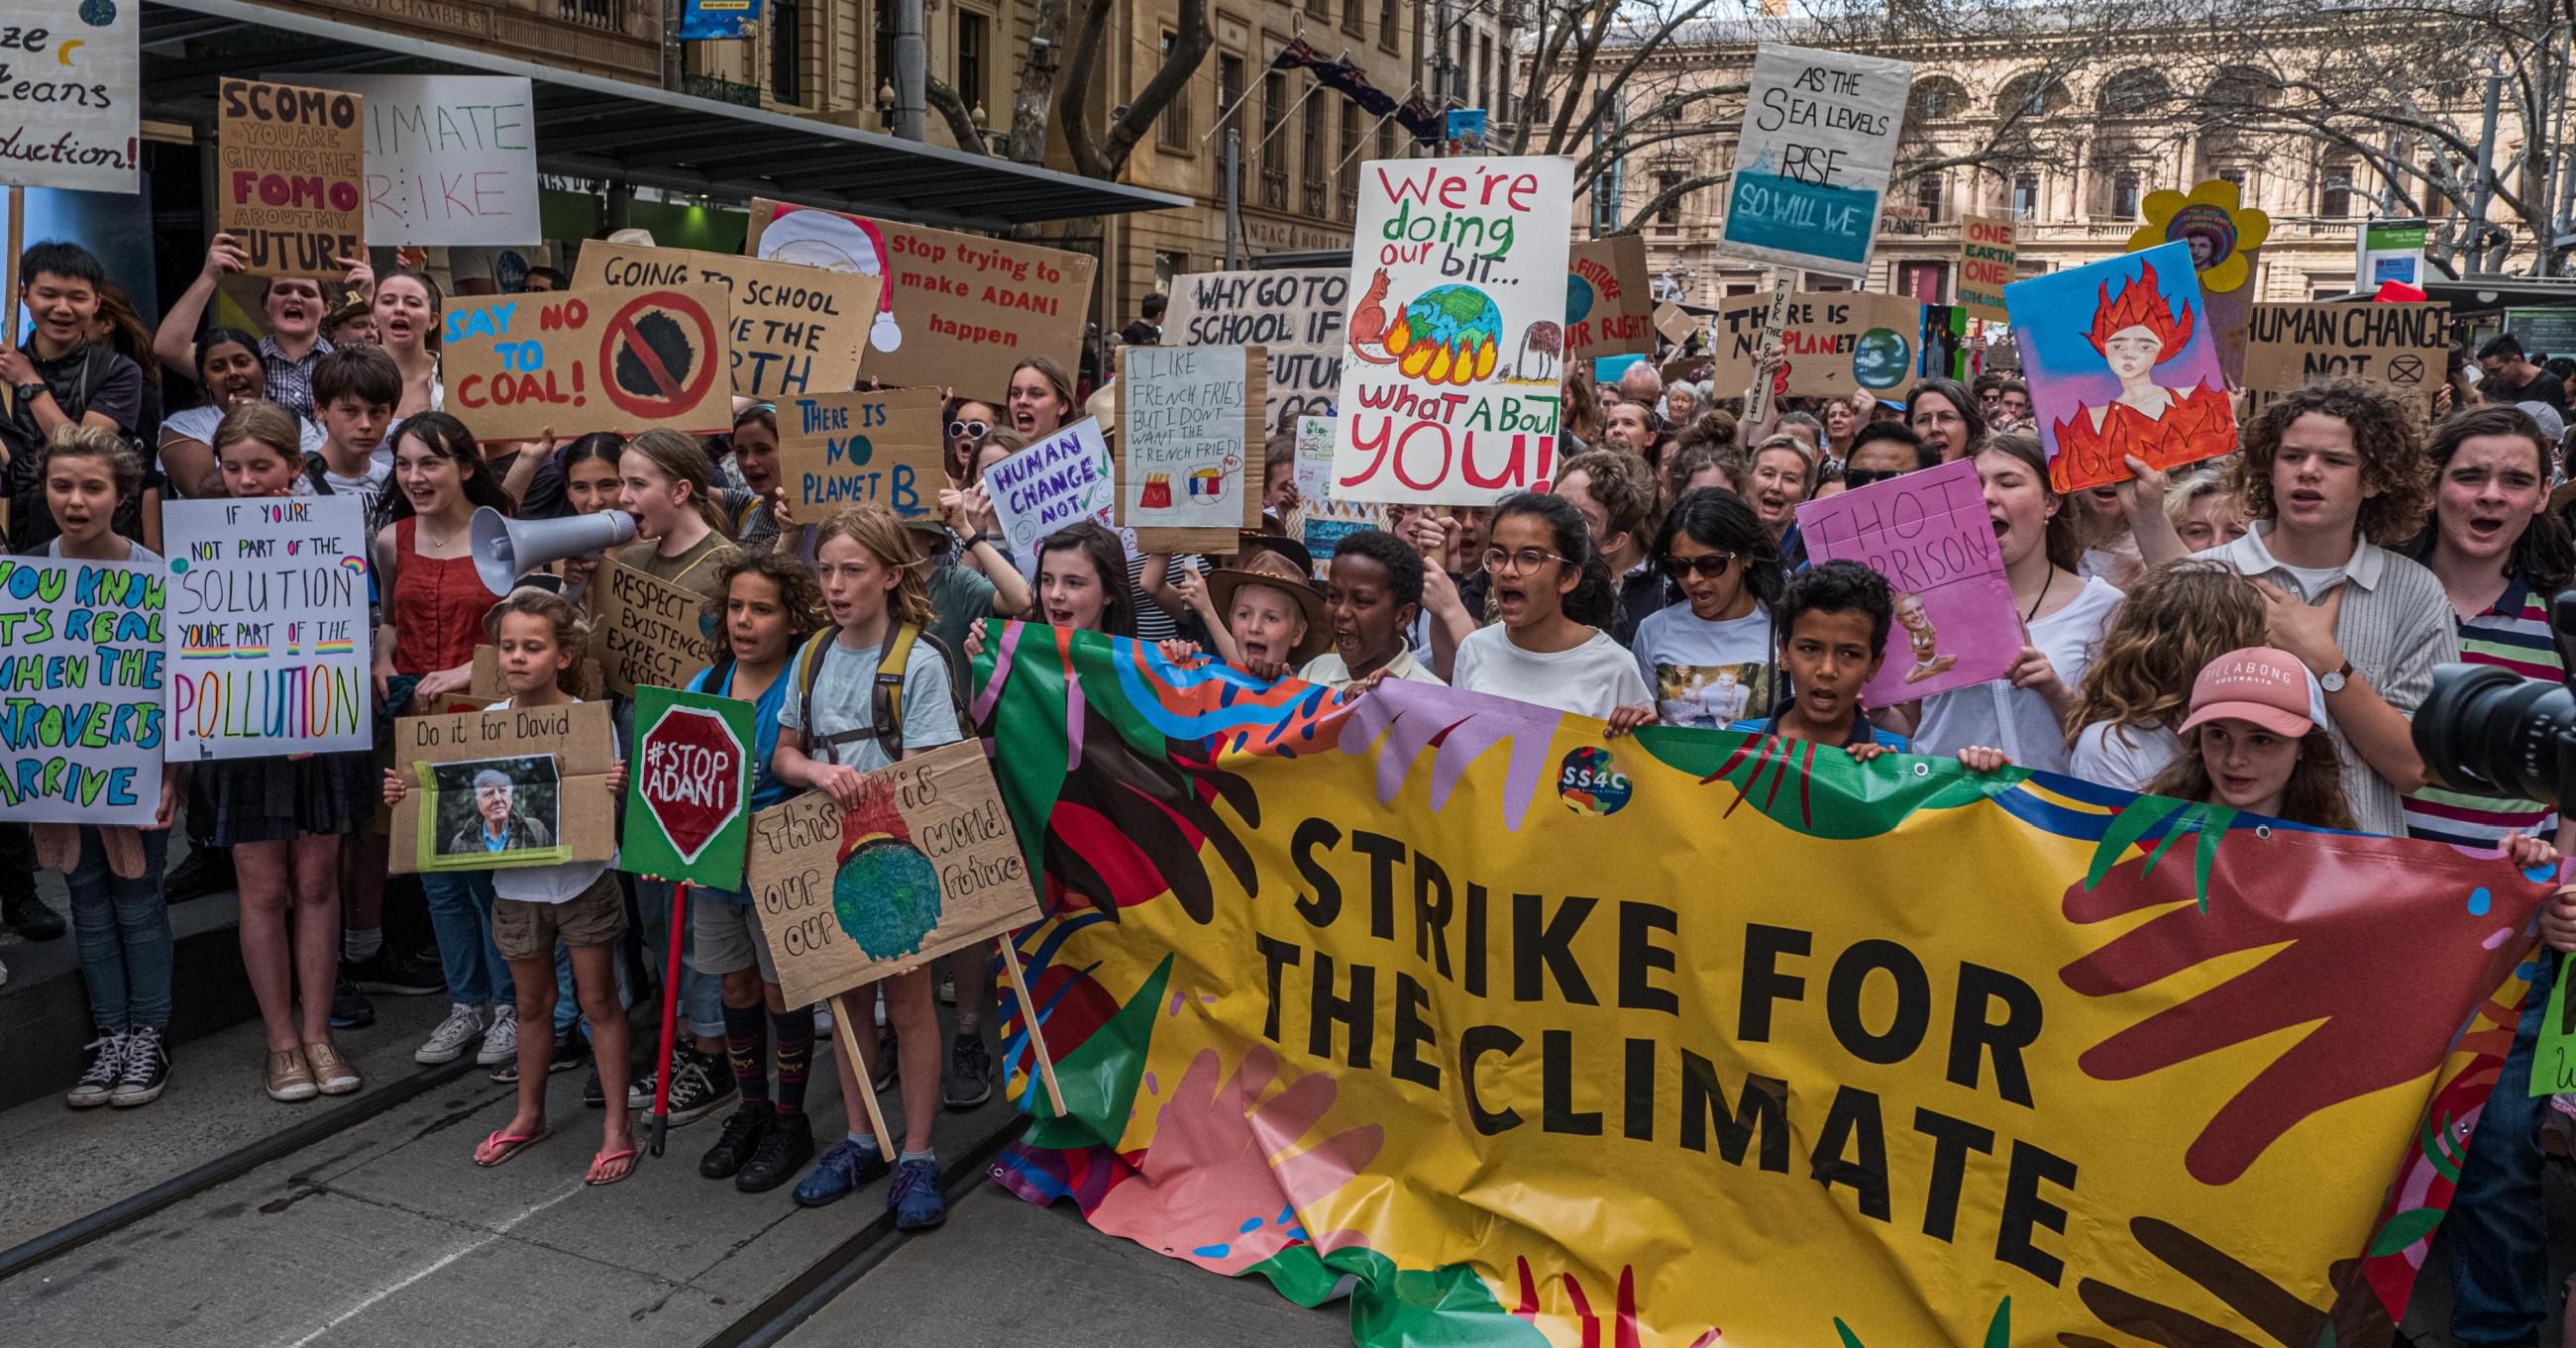 Australian youth lead a September 20, 2019 rally and march for climate action in Melbourne, Victoria. (Photo: Asanka Ratnayake/Getty Images)